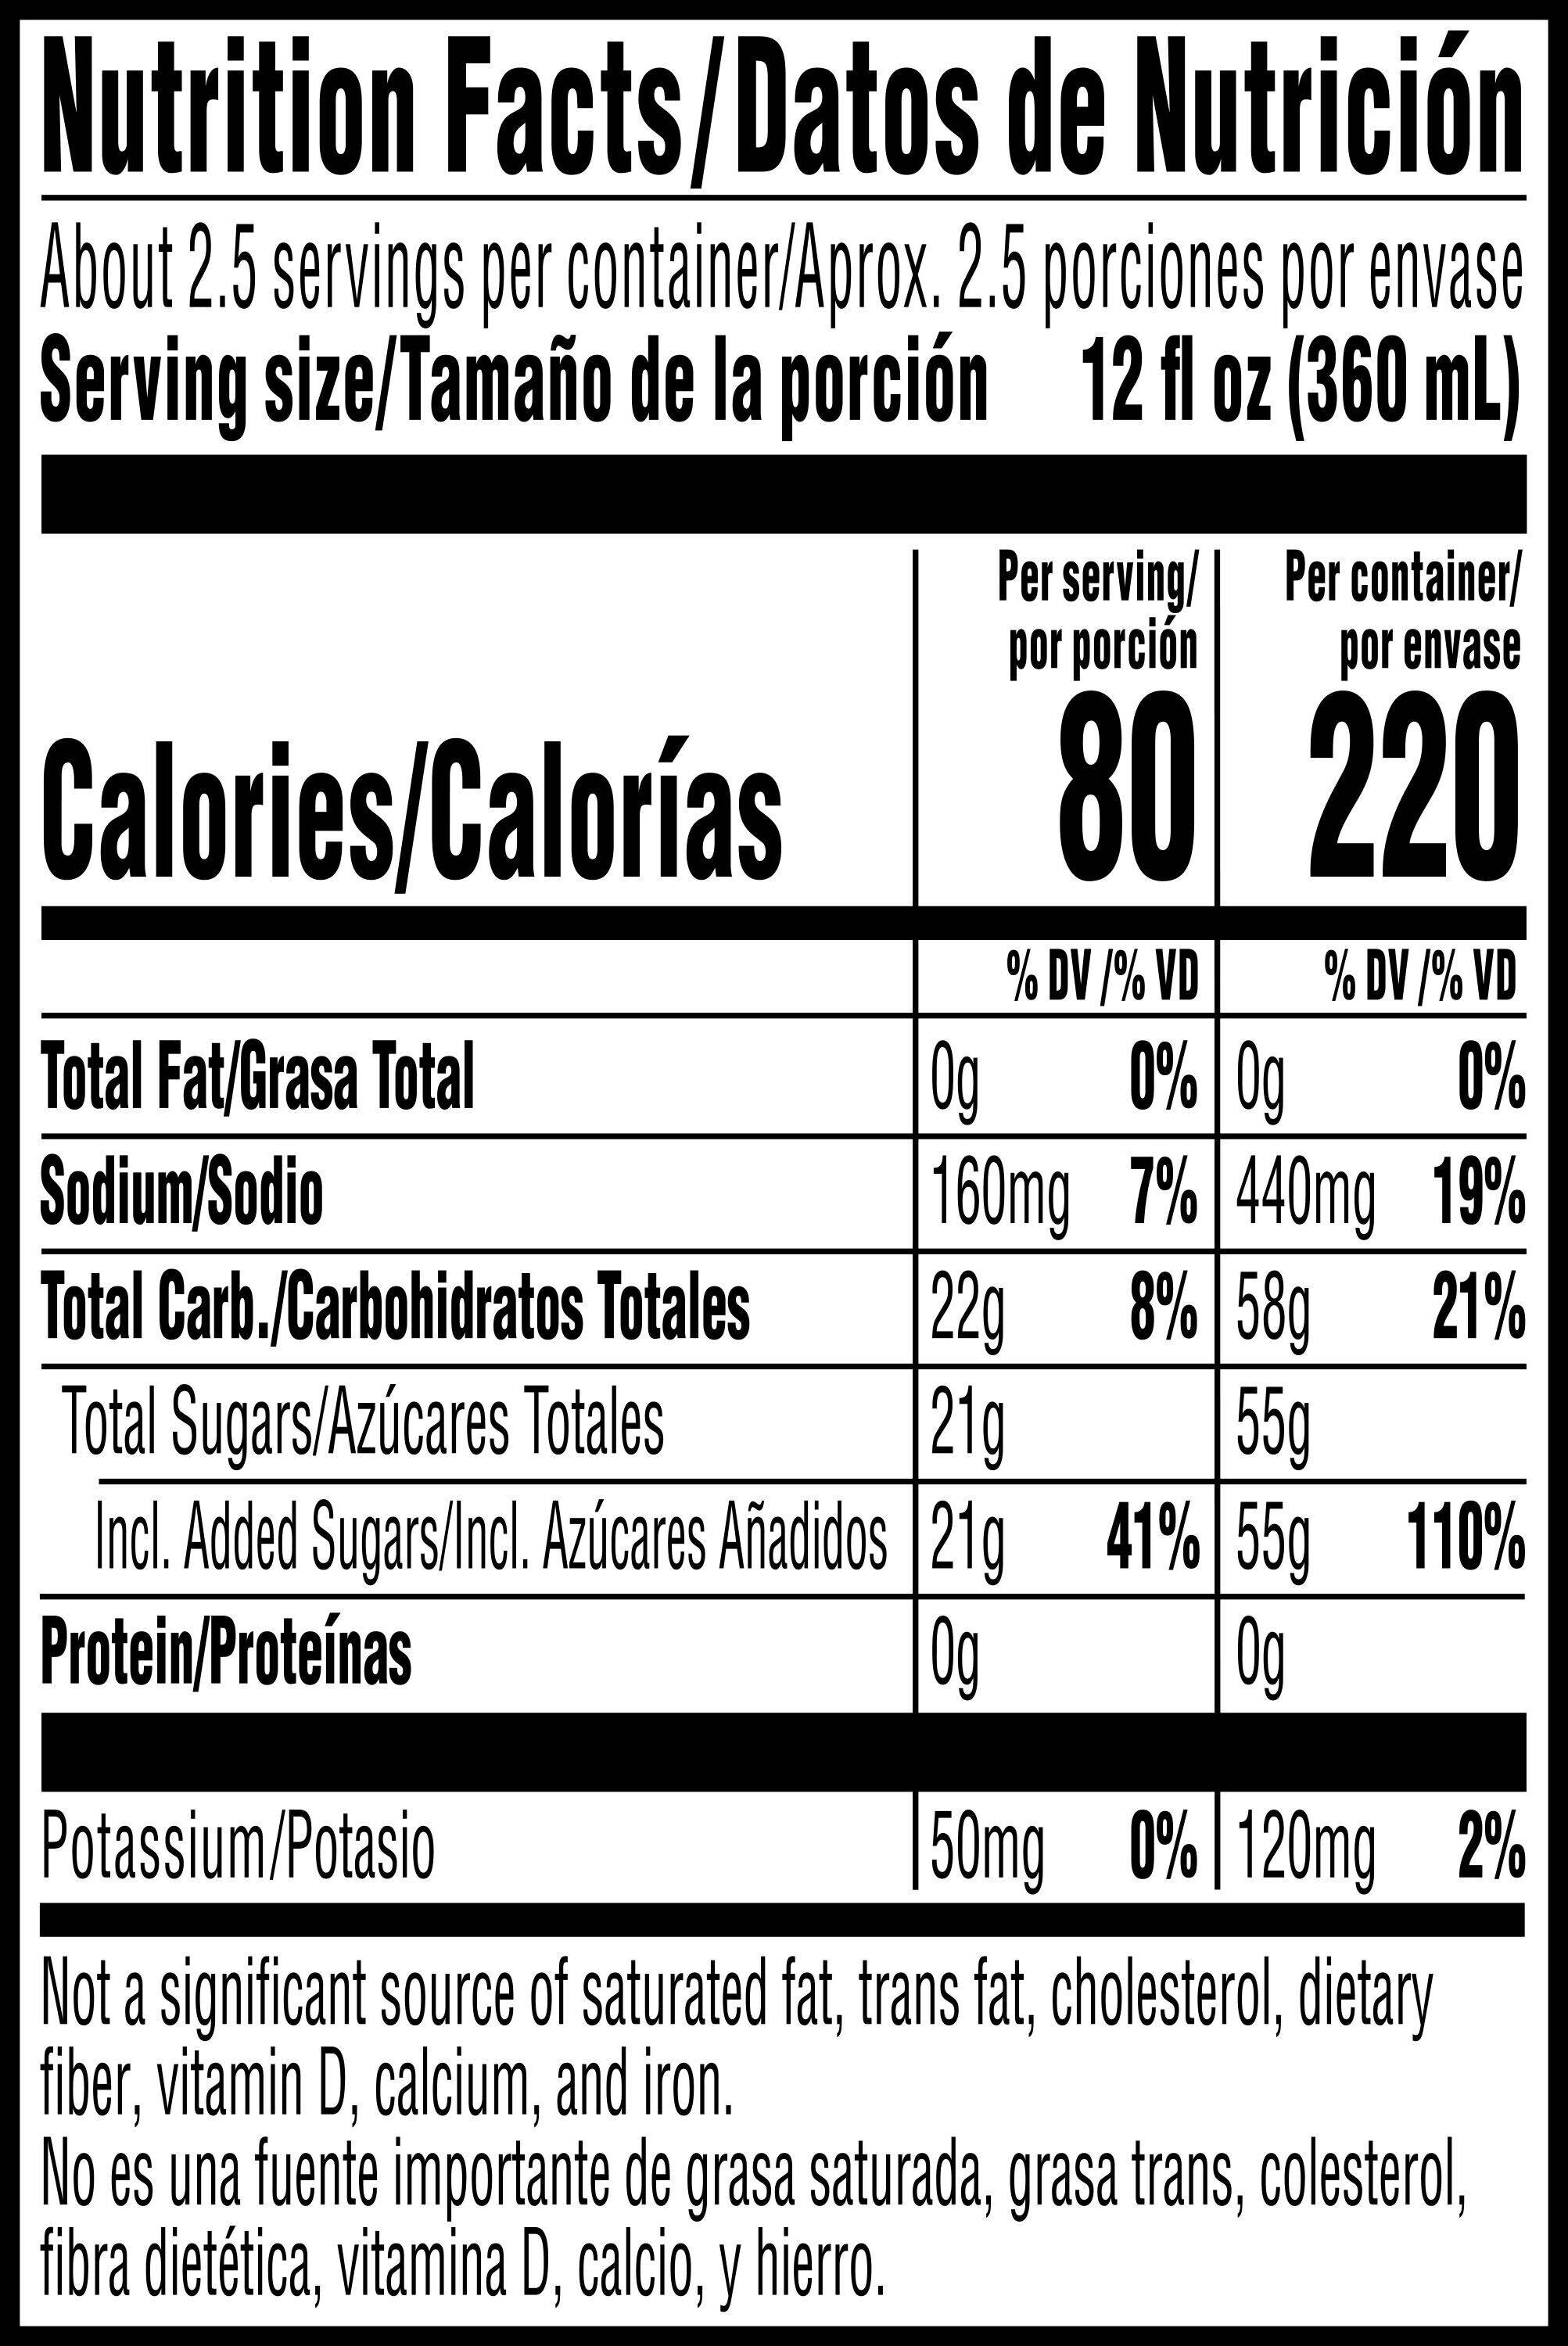 Image describing nutrition information for product Gatorade Lime Cucumber